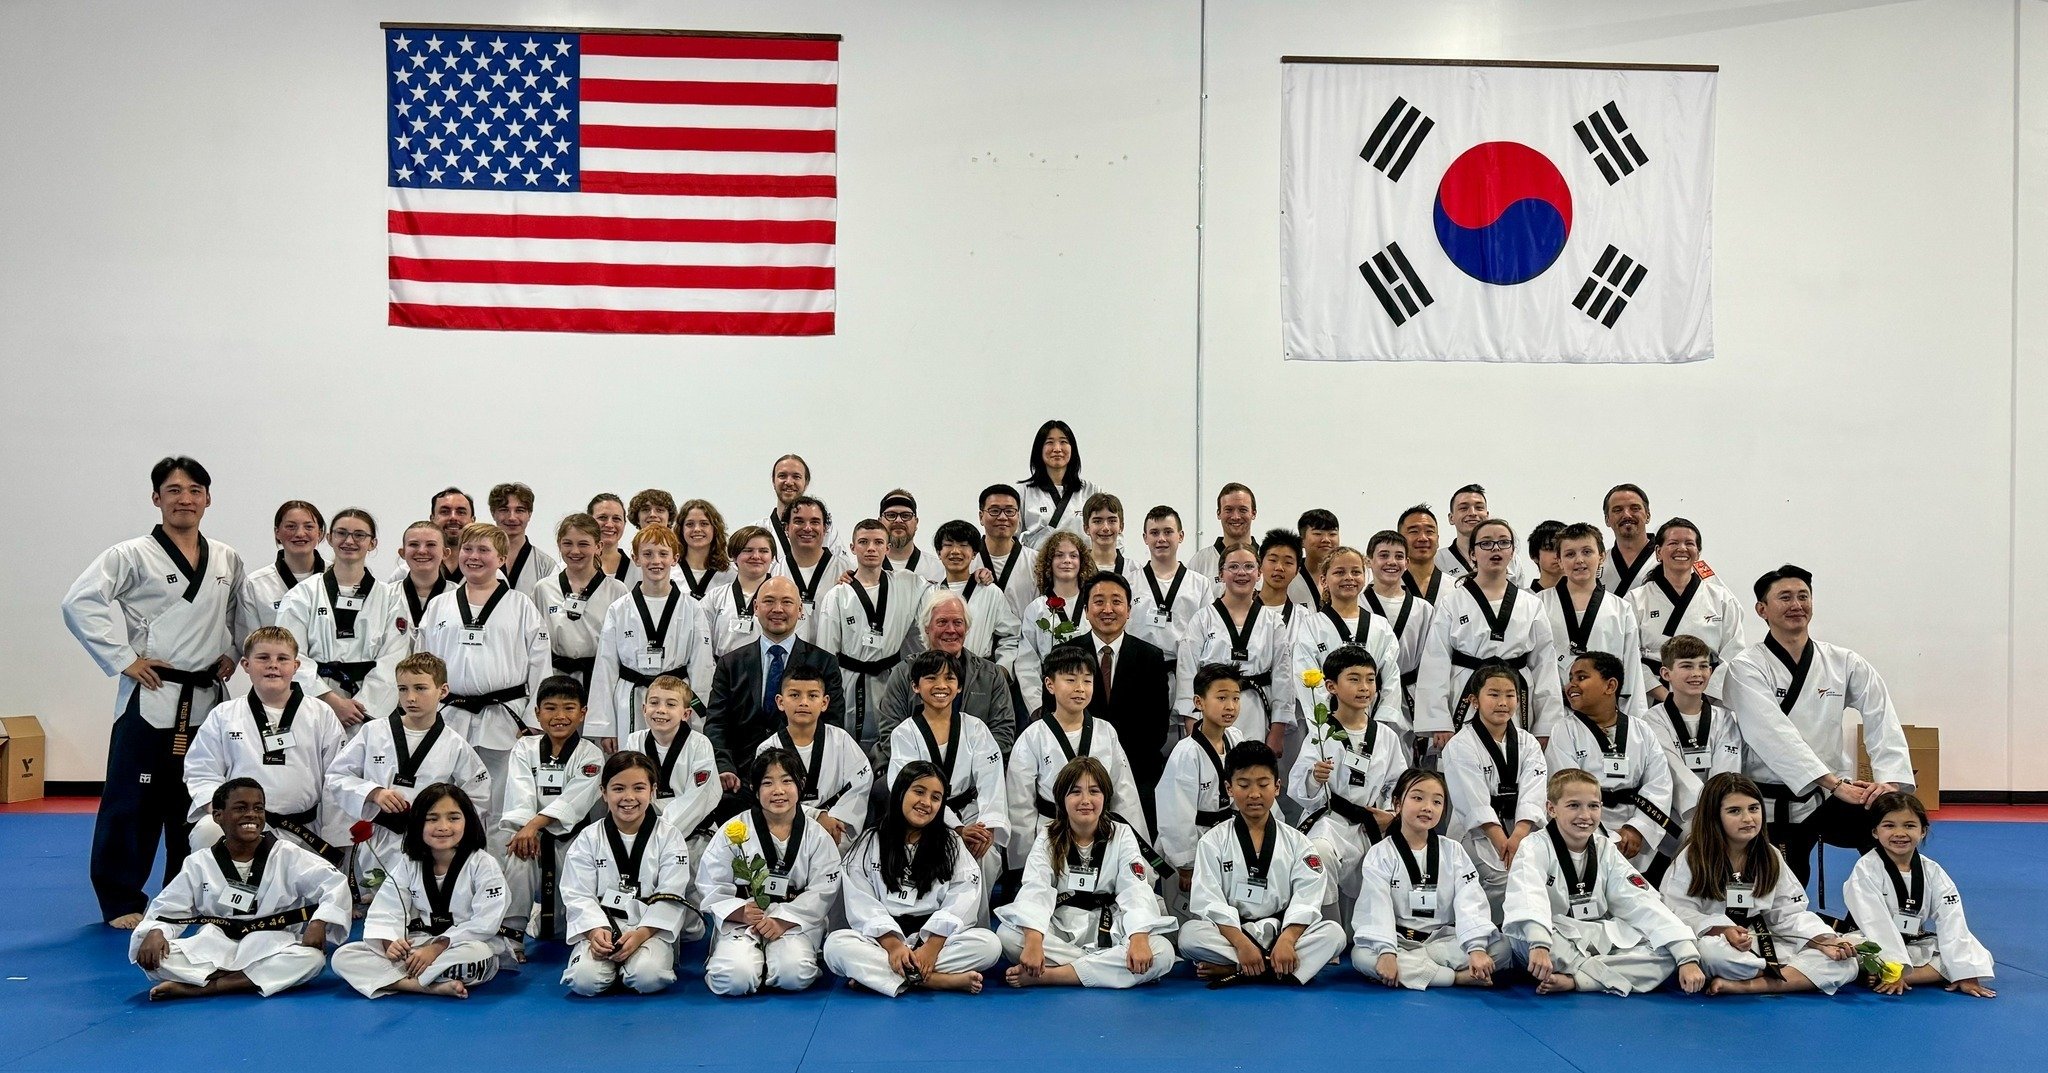 Congrats! Earning a Black Belt takes years of consistent training and determination. We are so proud of all of these students, and thankful for the support their families provided along the way! We hope you always carry this experience with you, alon